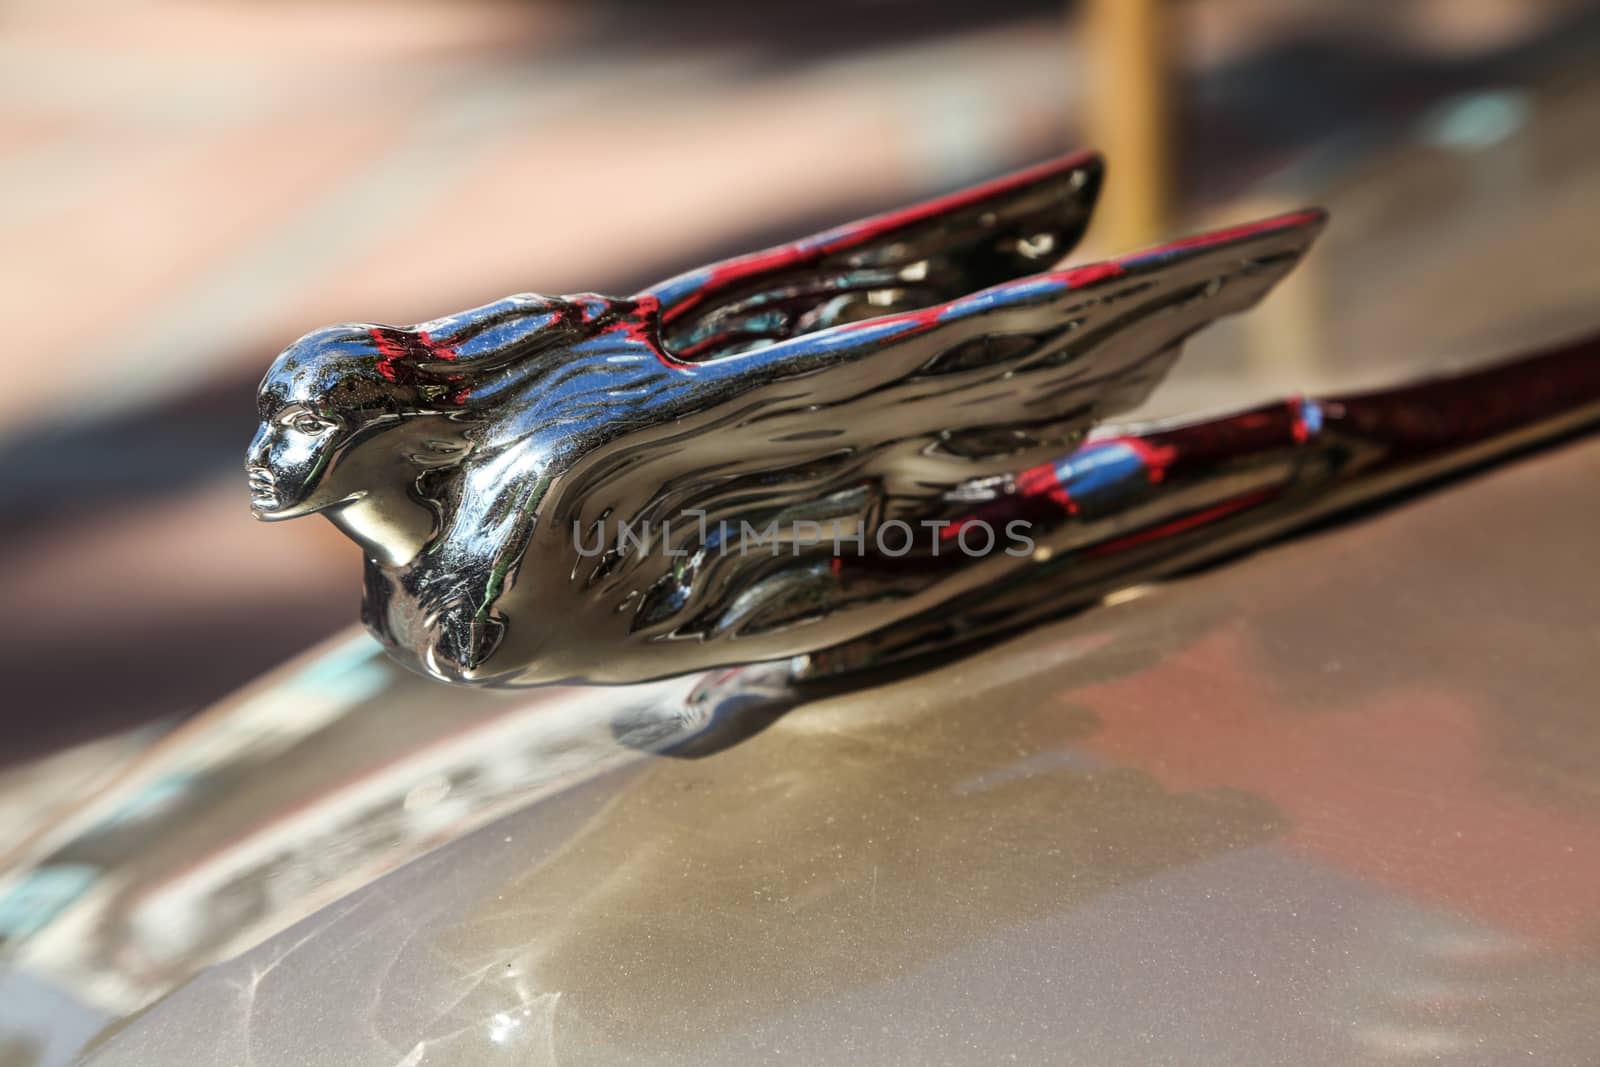 The hood ornament of a car shaped like a person with wings